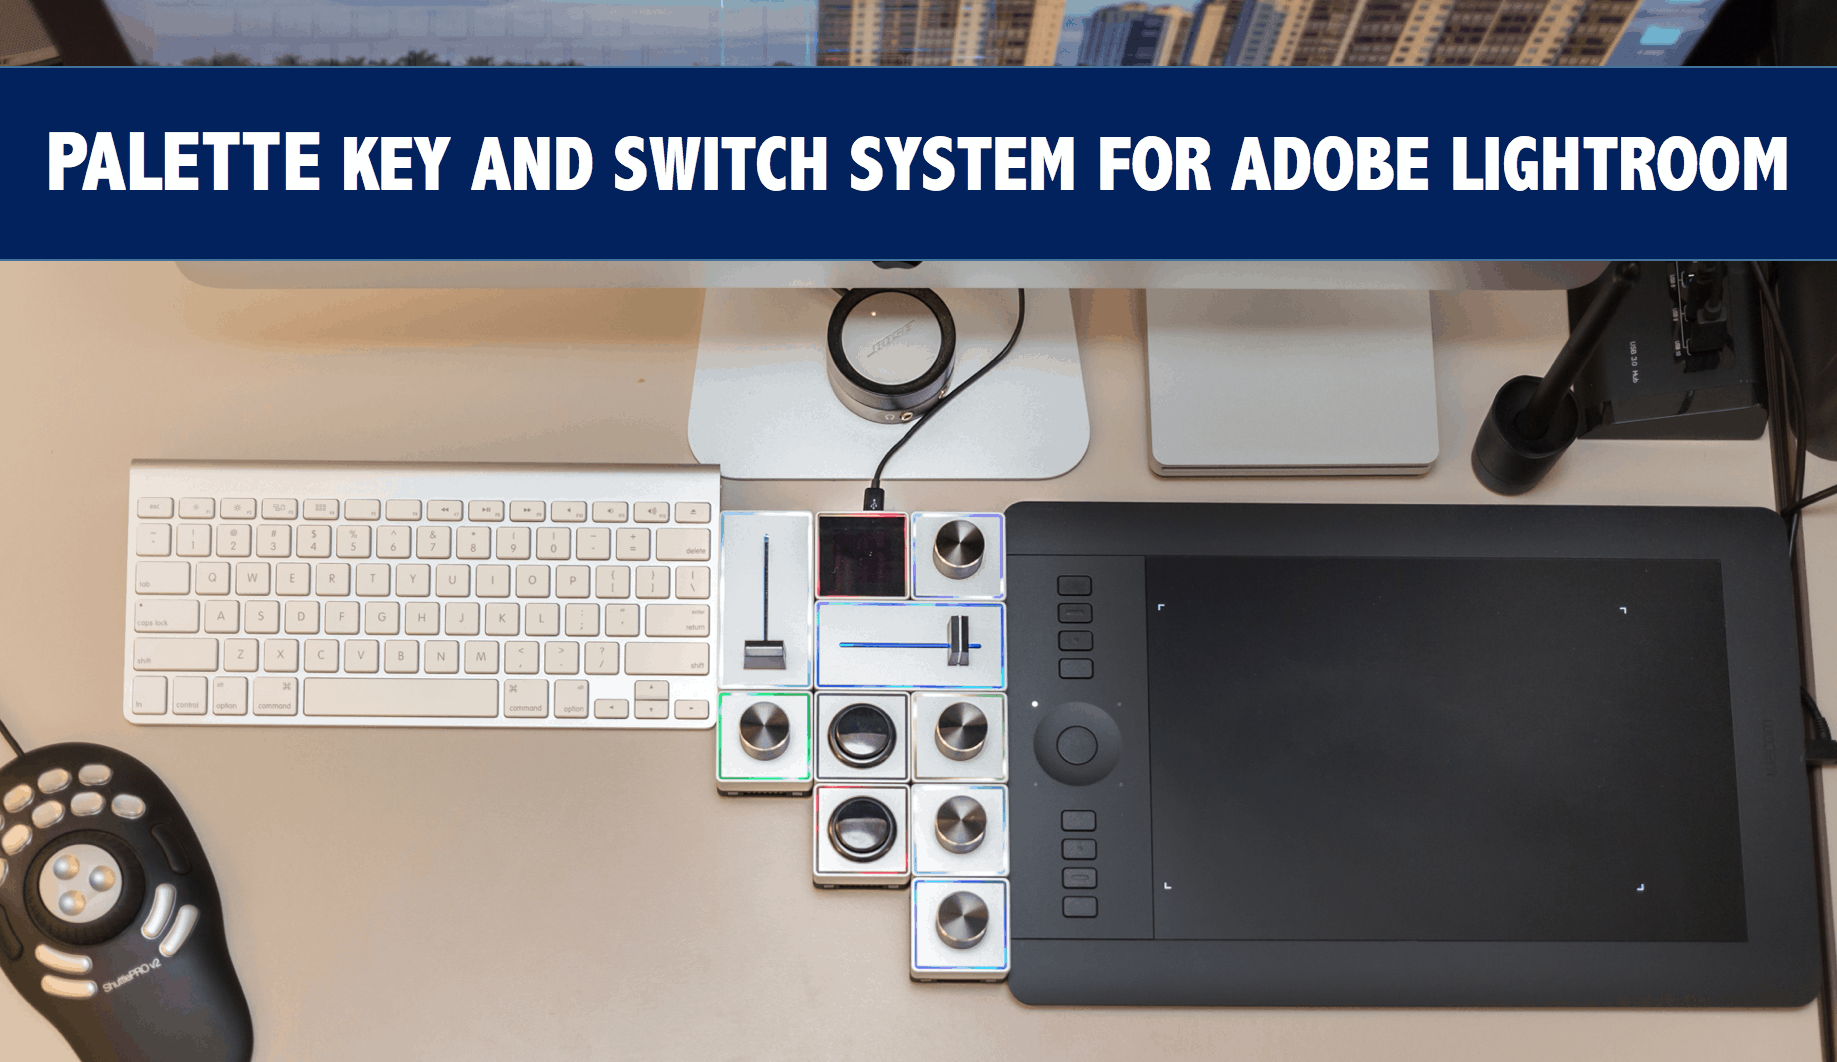 Palette gear key and switch system for Adobe Lightroom